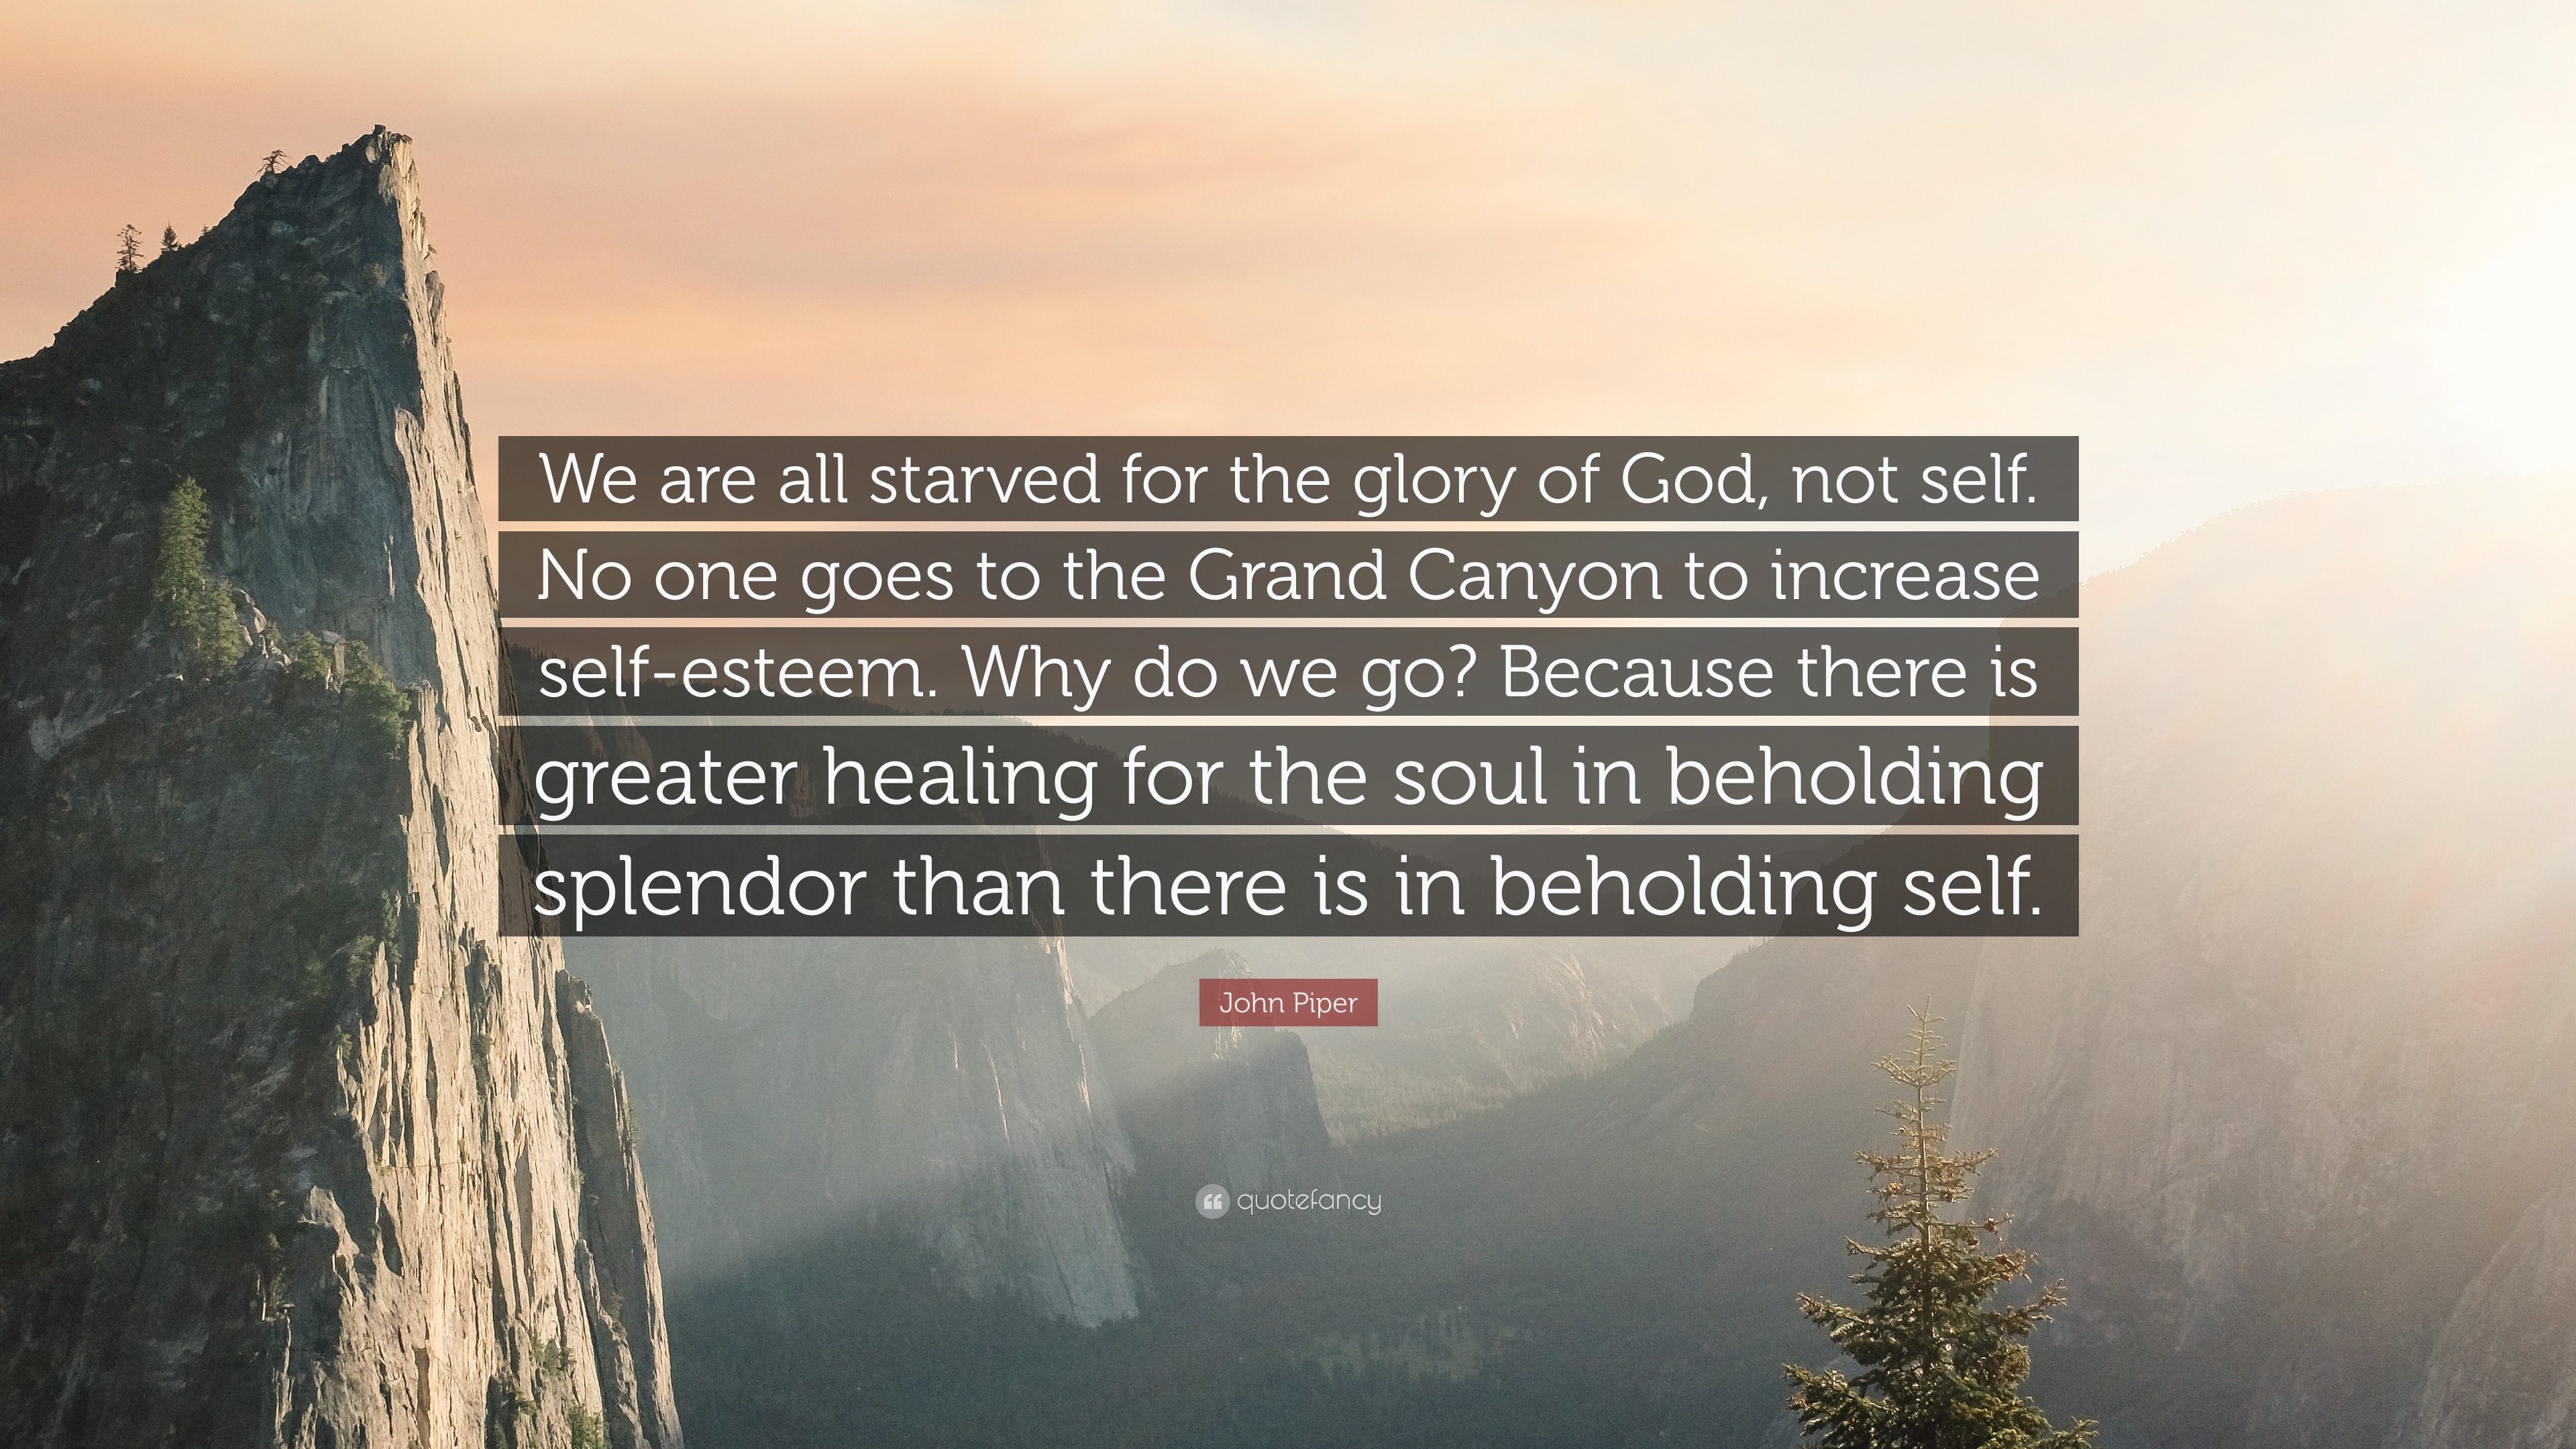 227296-John-Piper-Quote-We-are-all-starved-for-the-glory-of-God-not-self.jpg